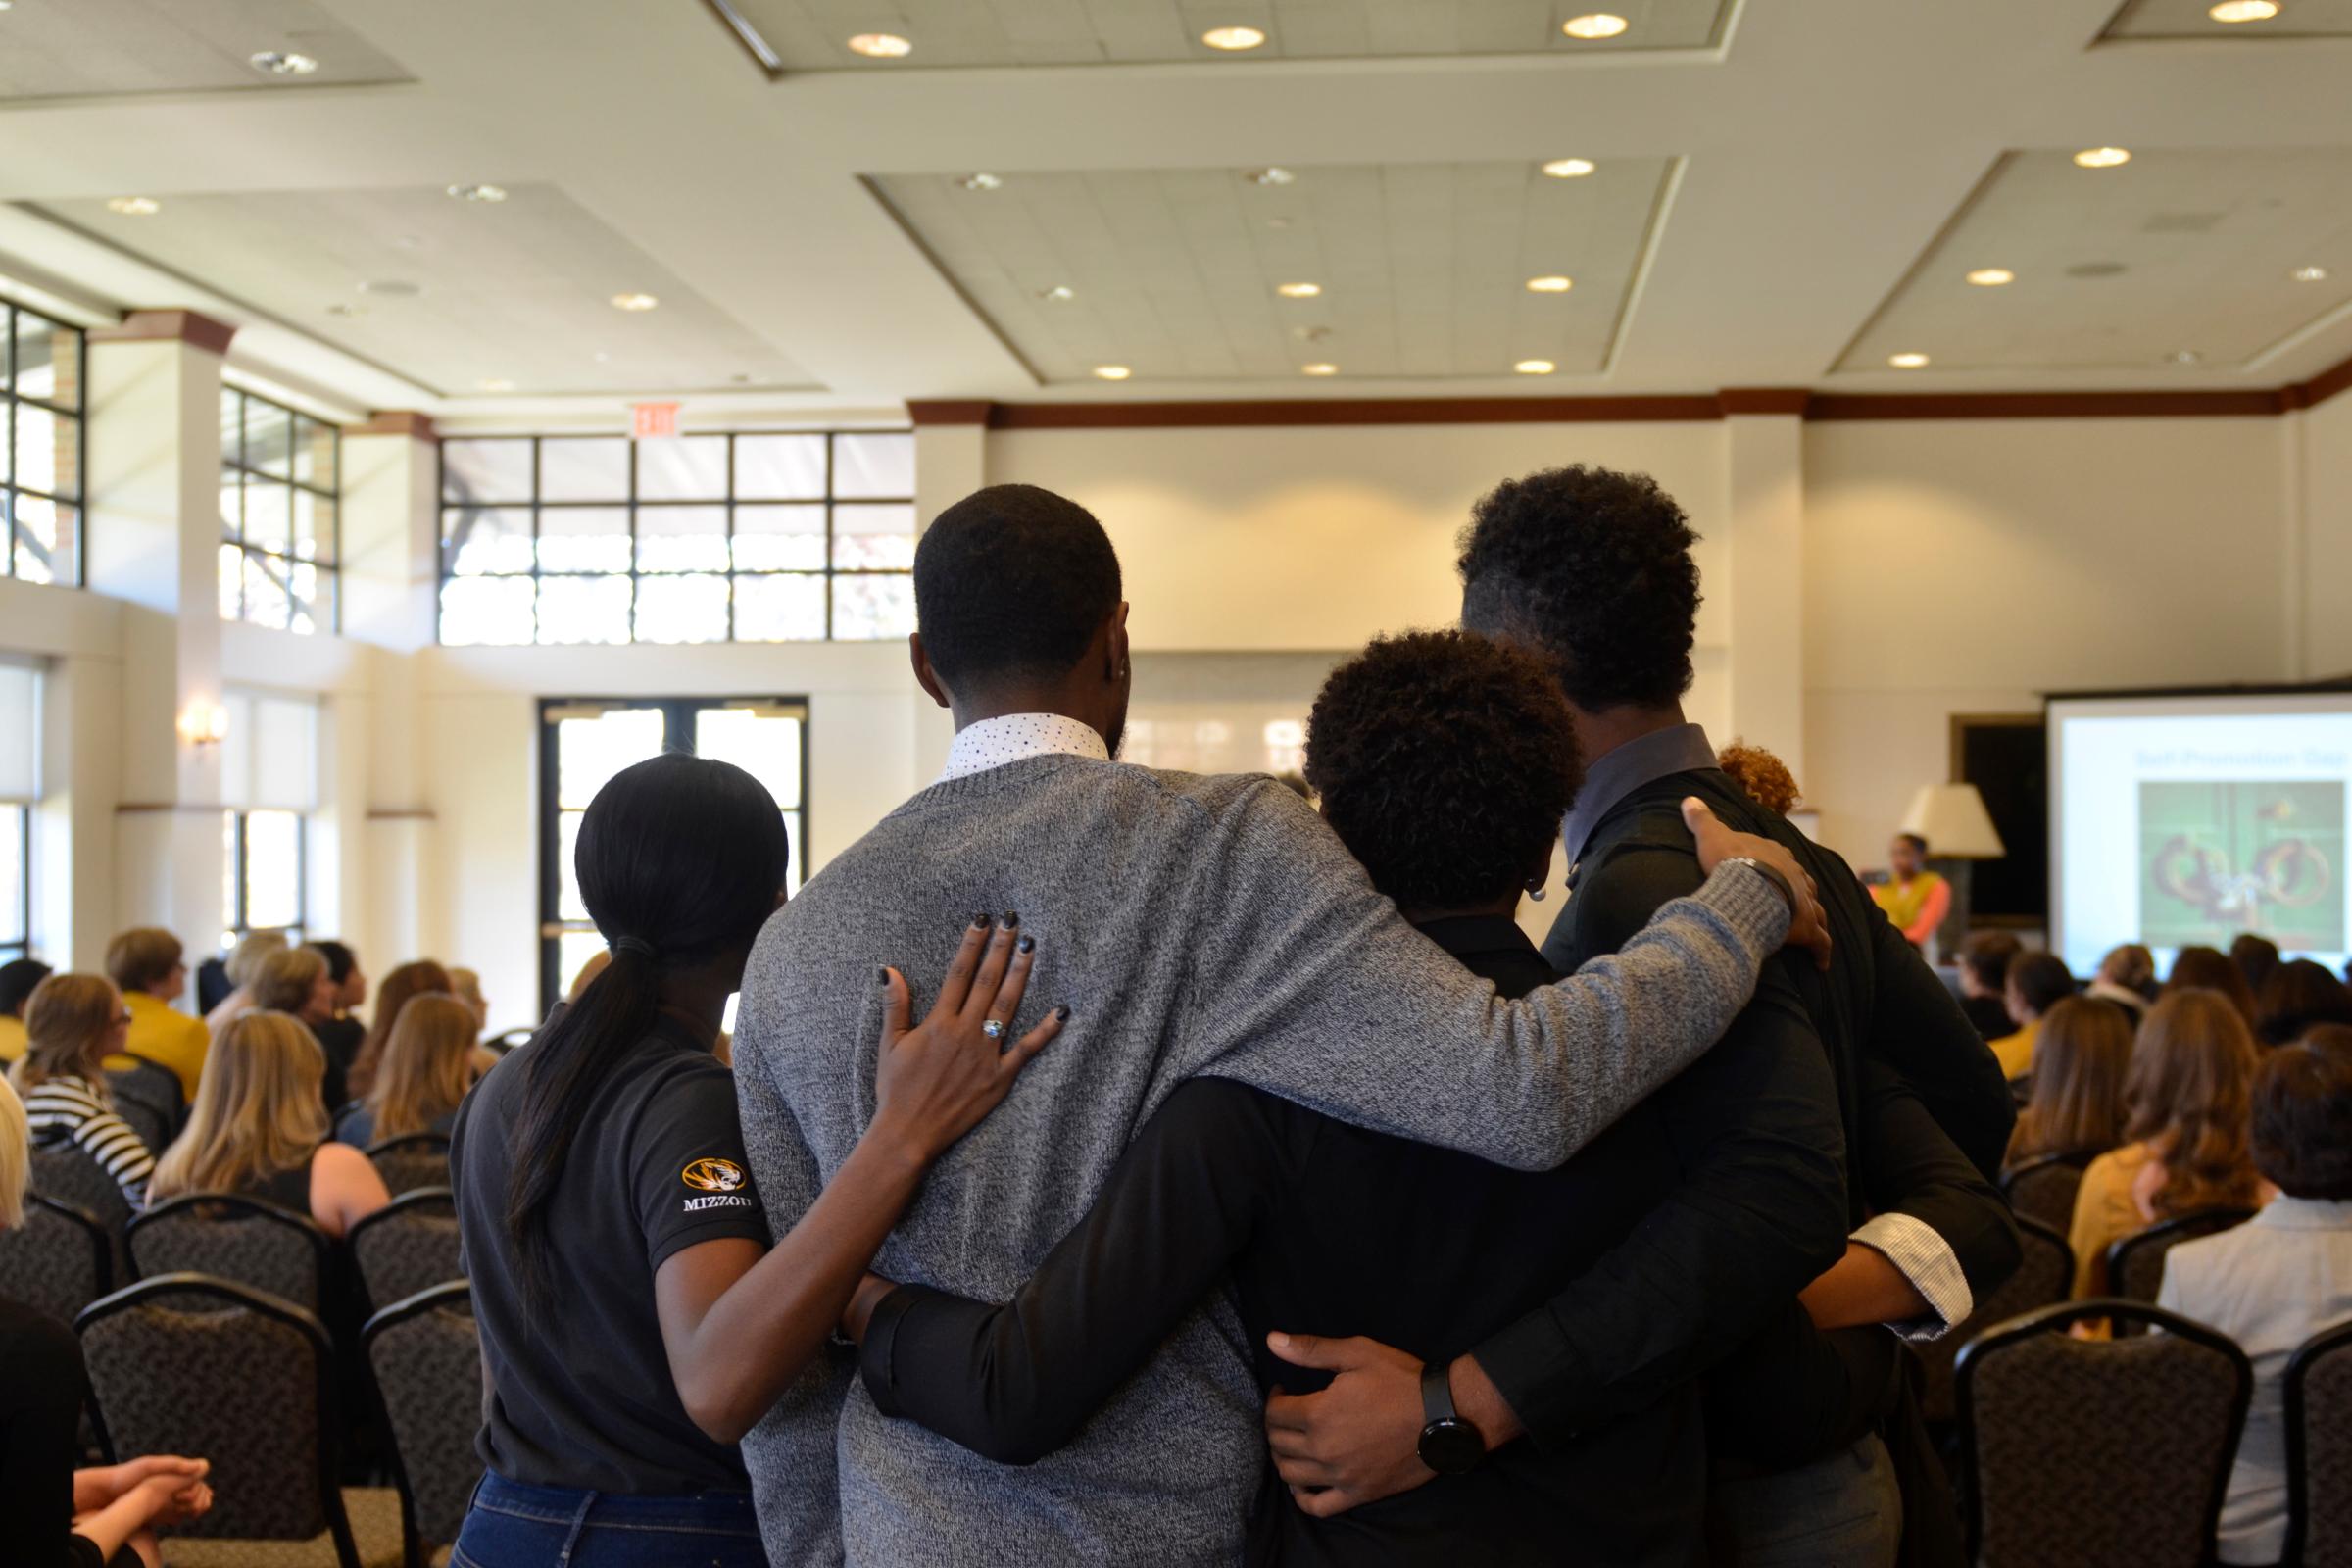 Members of Concerned Student 1950 embrace during a protest in the Reynolds Alumni Center on Nov. 7, 2015. The alumni center was one of many stops the students took during a traveling protest to voice concerns.